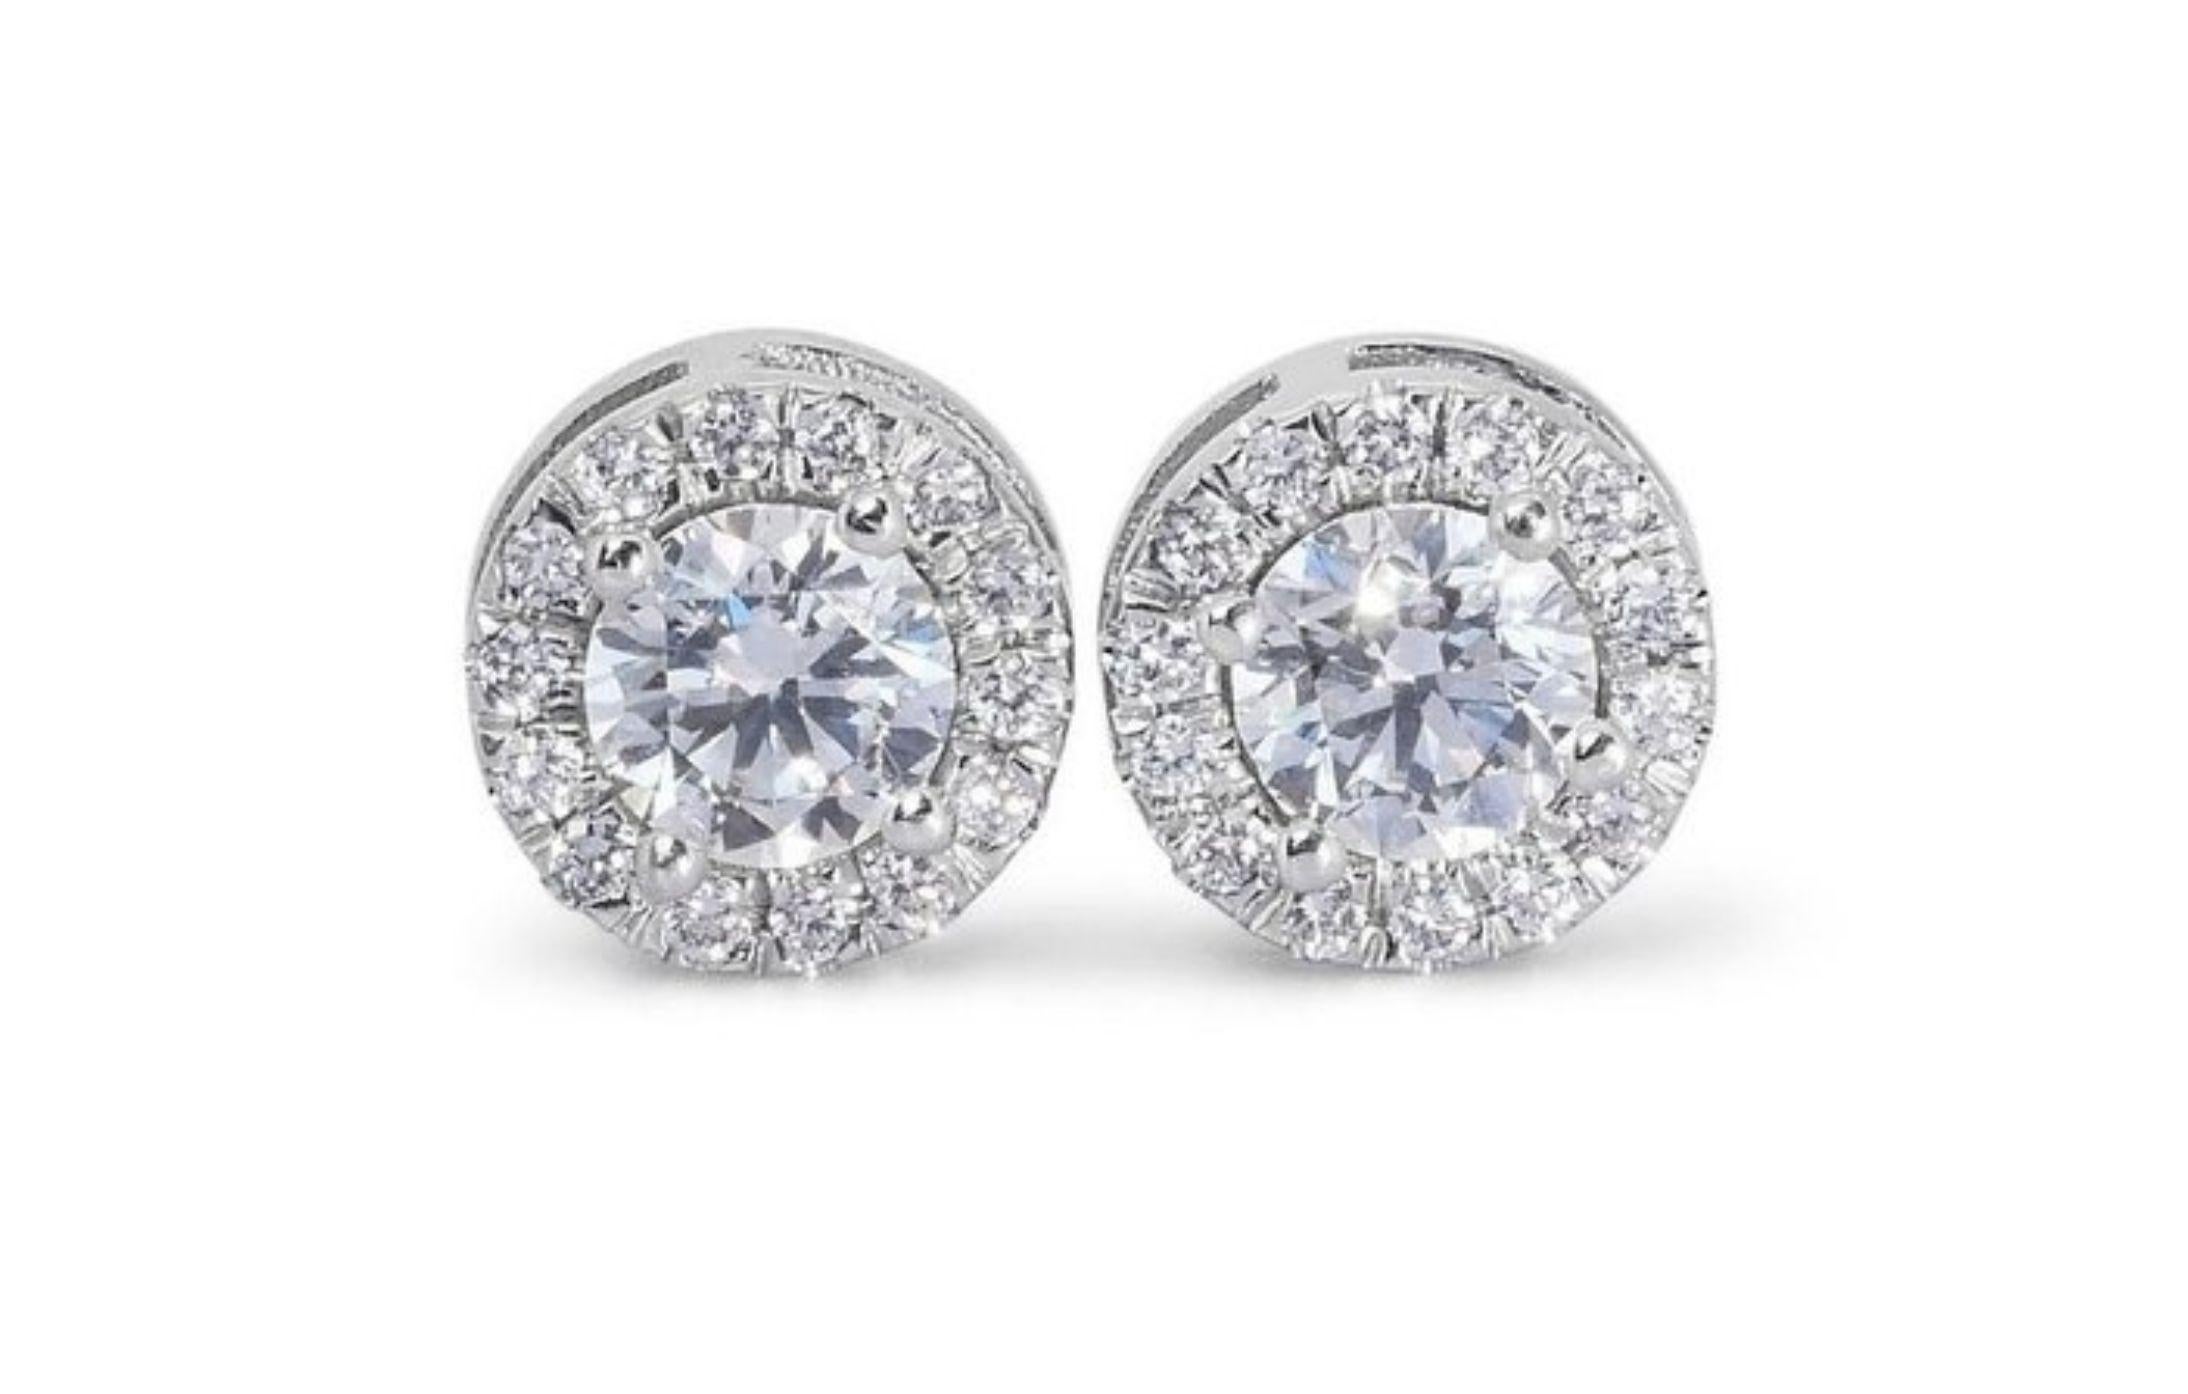 Own a timeless treasure with these exquisite 1 carat diamond earrings, radiating breathtaking brilliance and effortless sophistication with .25 ct side diamonds. Meticulously crafted in 18K white gold, these earrings showcase two dazzling round